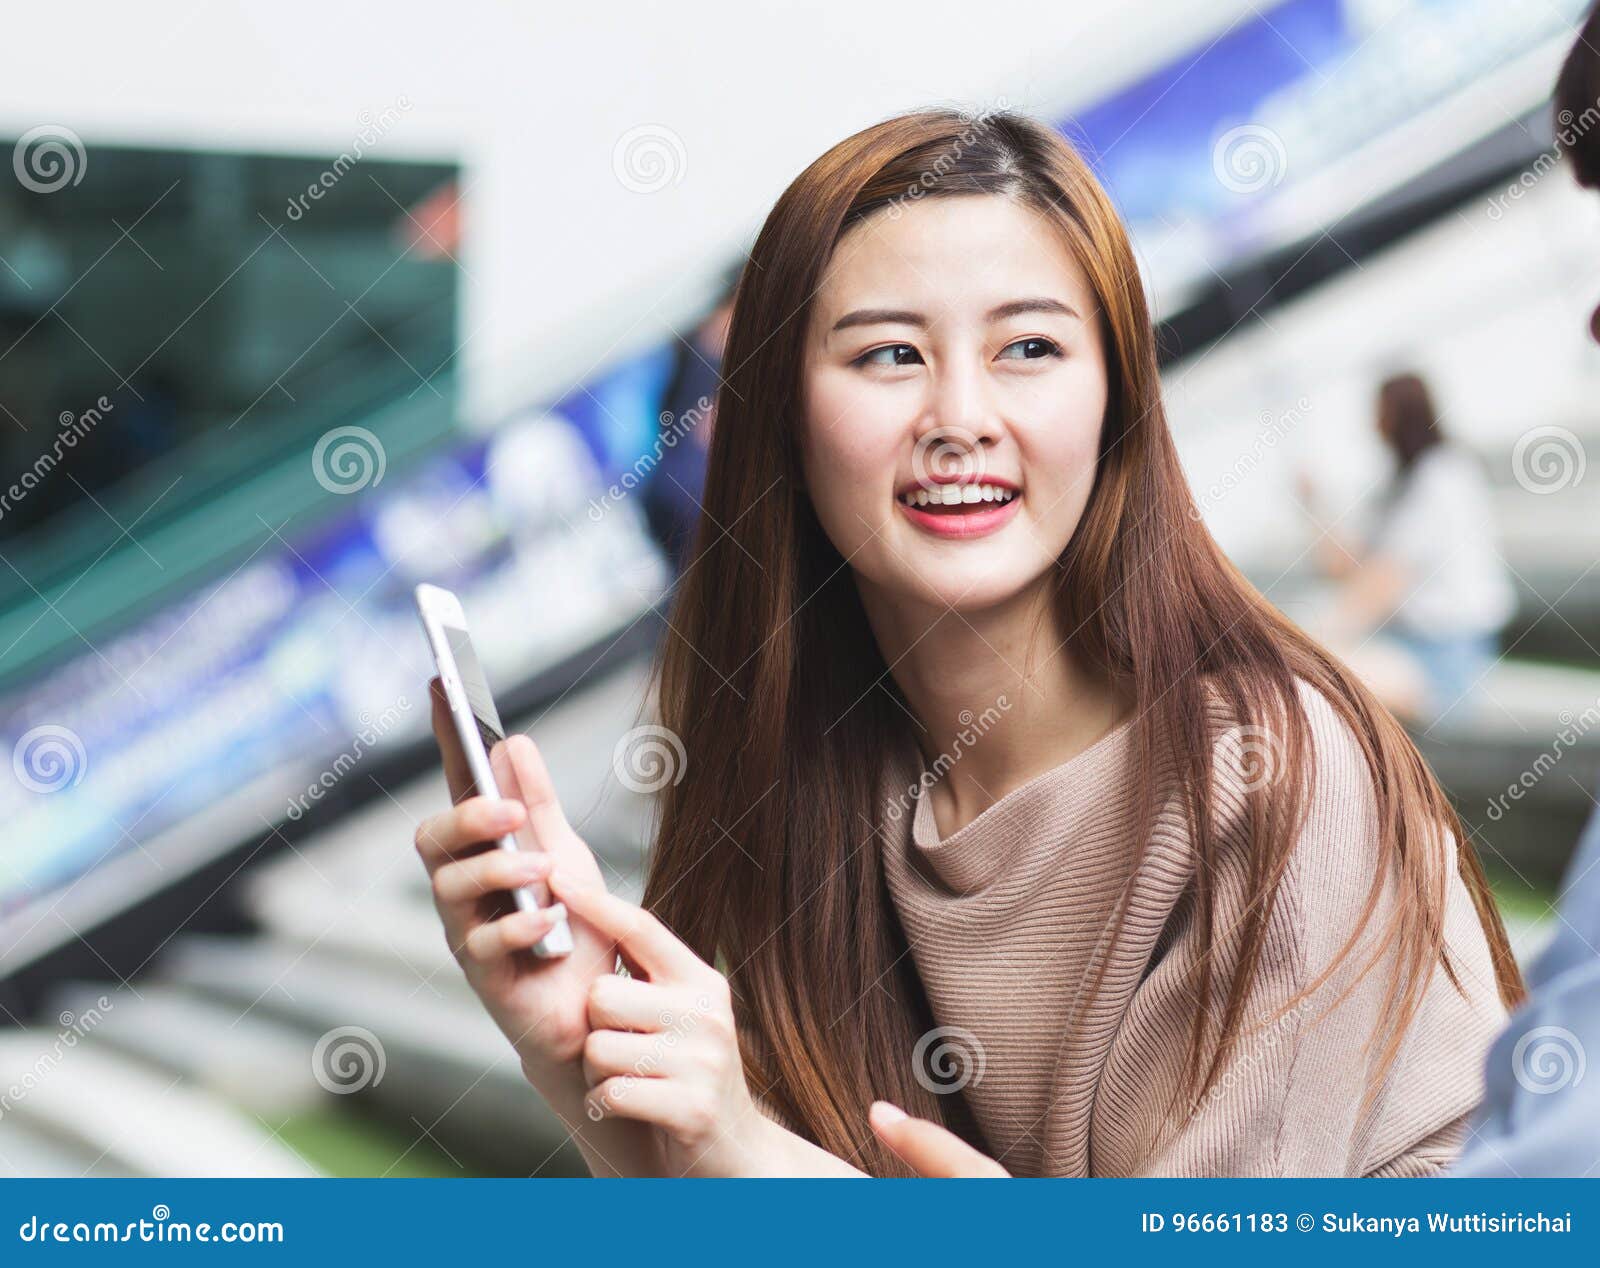 https://thumbs.dreamstime.com/z/asian-charming-female-smiling-presenting-cell-phone-to-another-asian-charming-female-smiling-presenting-cell-phone-to-96661183.jpg